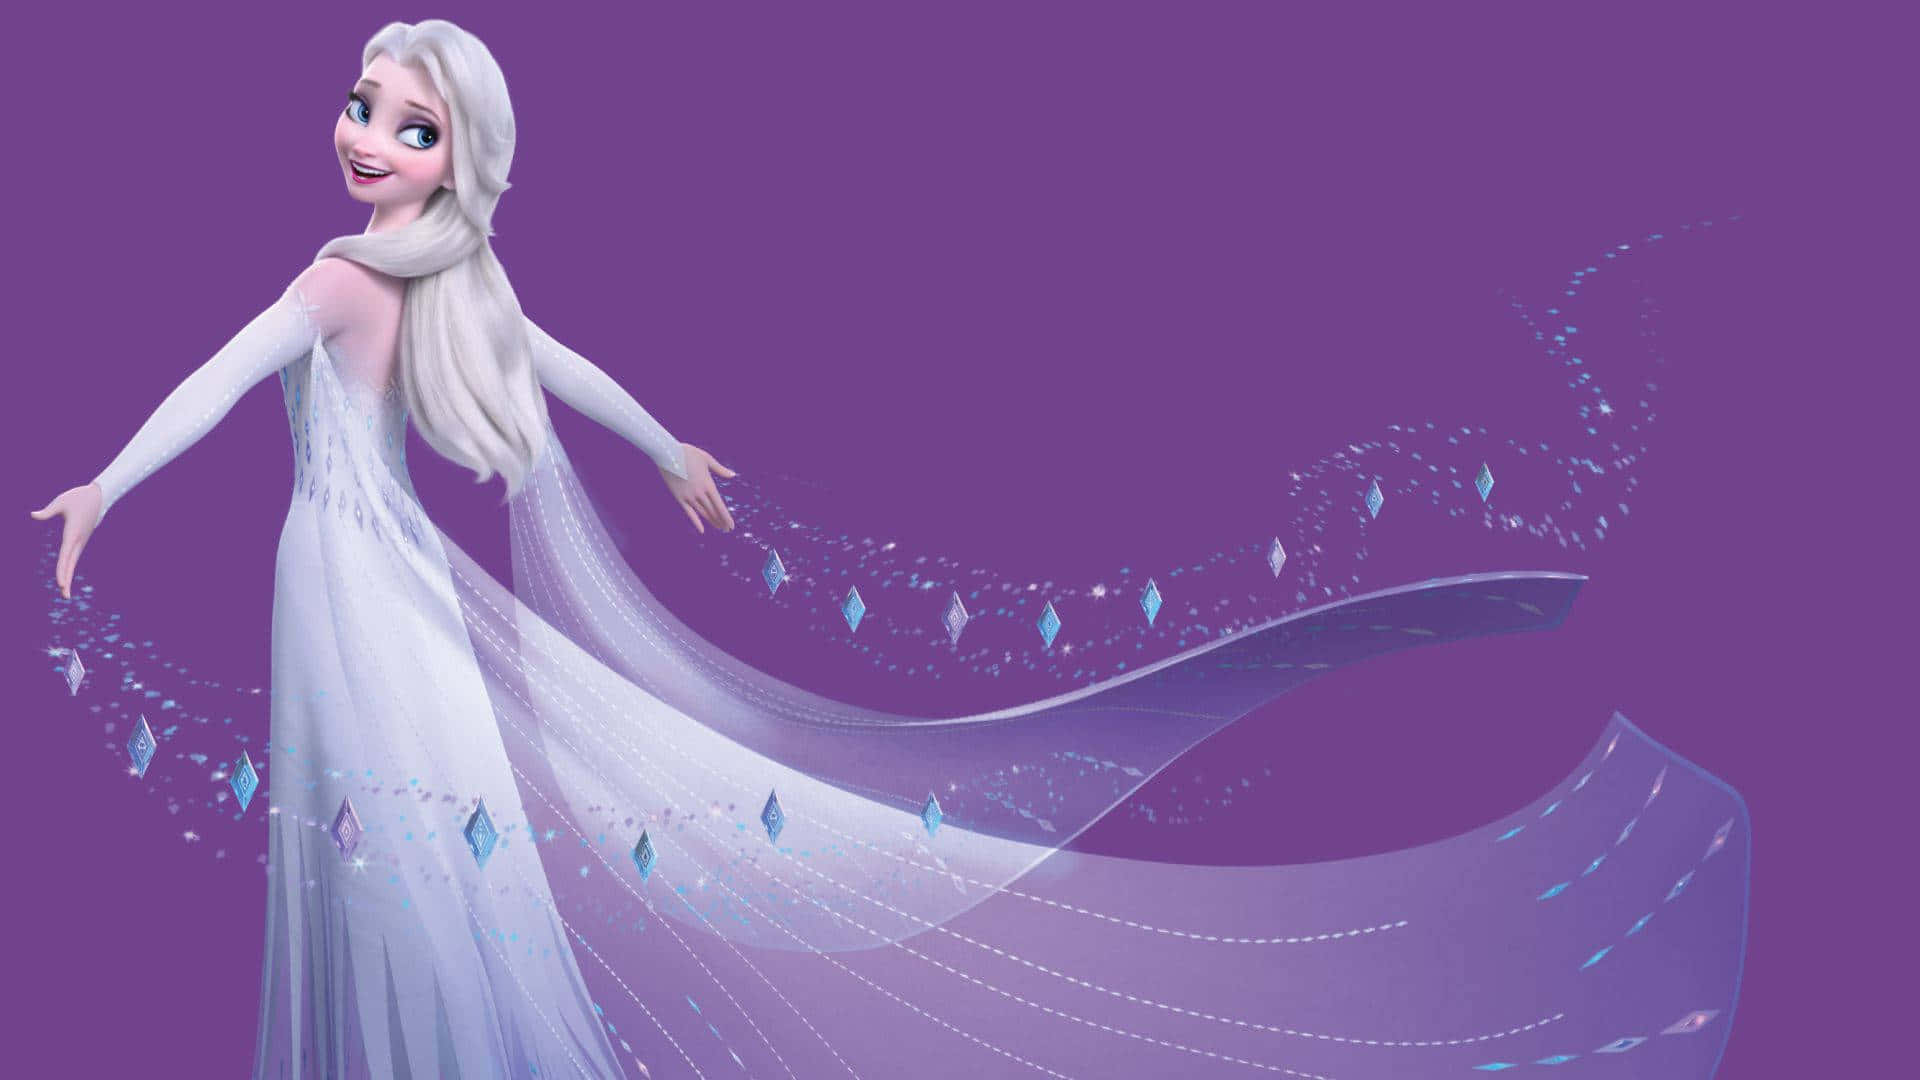 “Let it Go: Princess Elsa uses her magical powers to bring winter to life.”